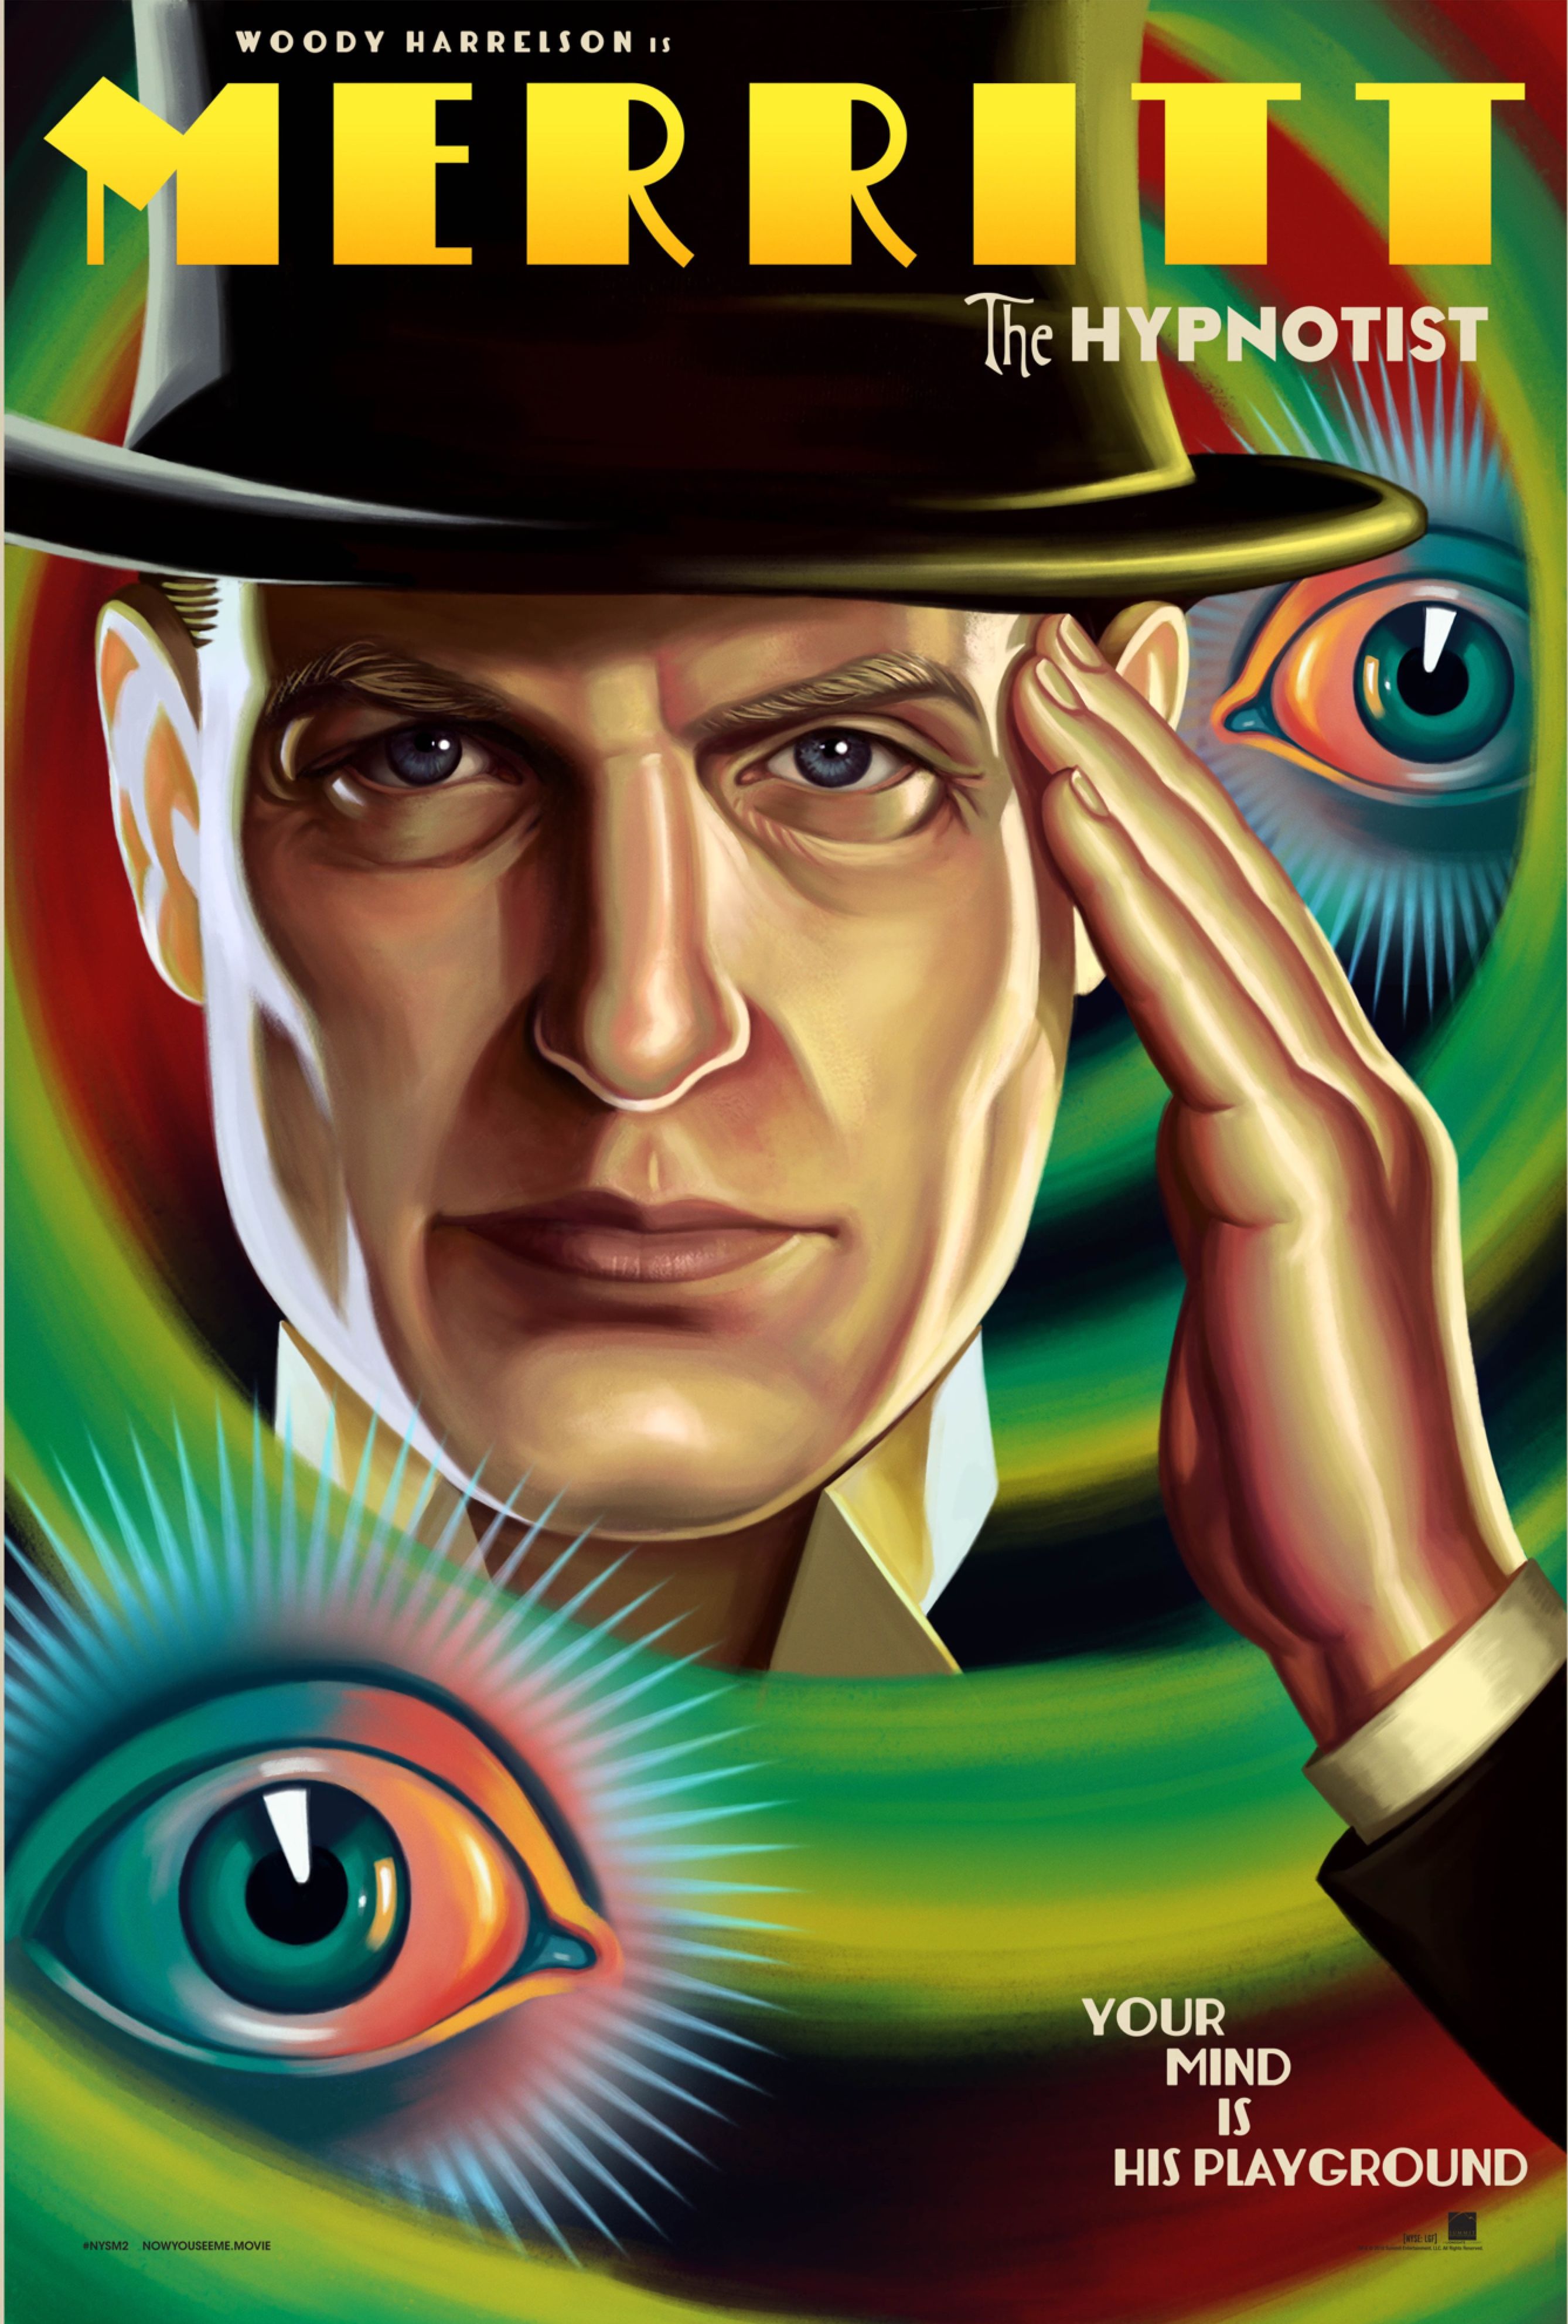 Woody Harrelson in new retro poster for Now You See Me 2